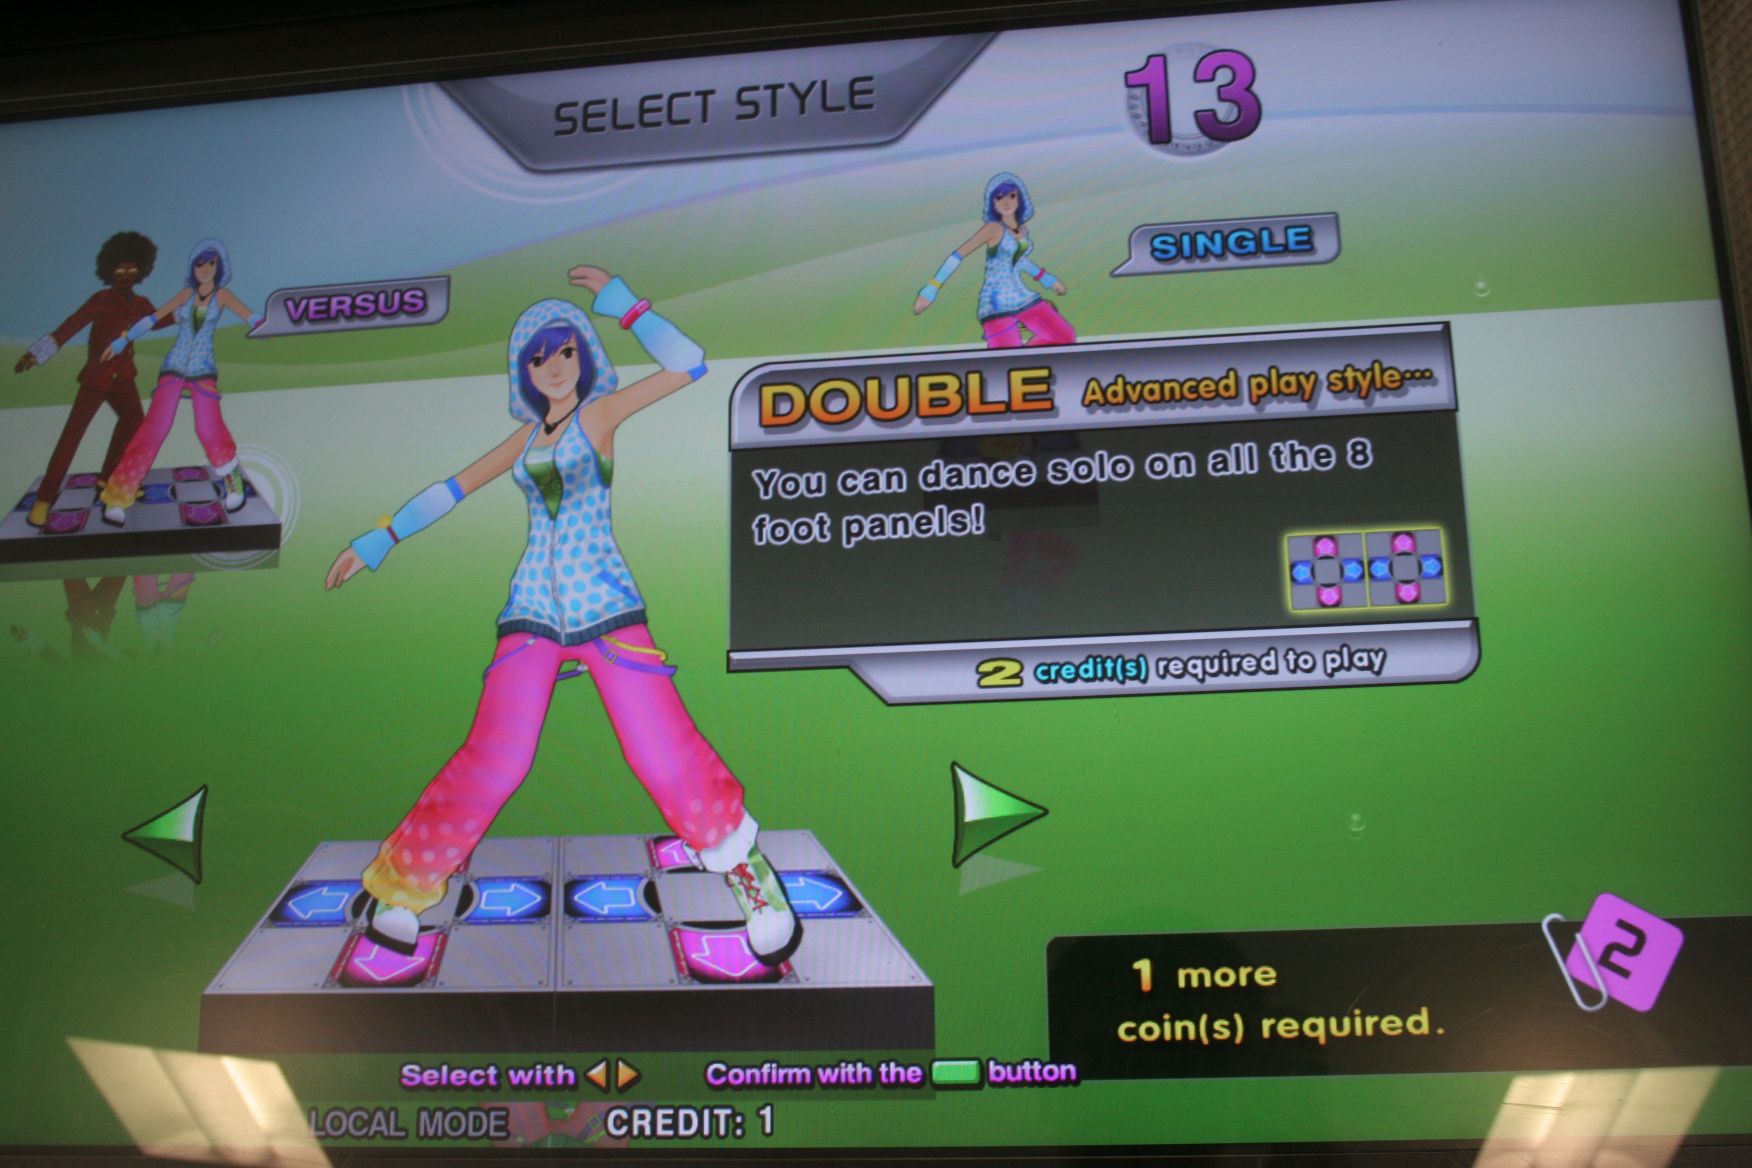 Select Style (In PRO, DOUBLE)